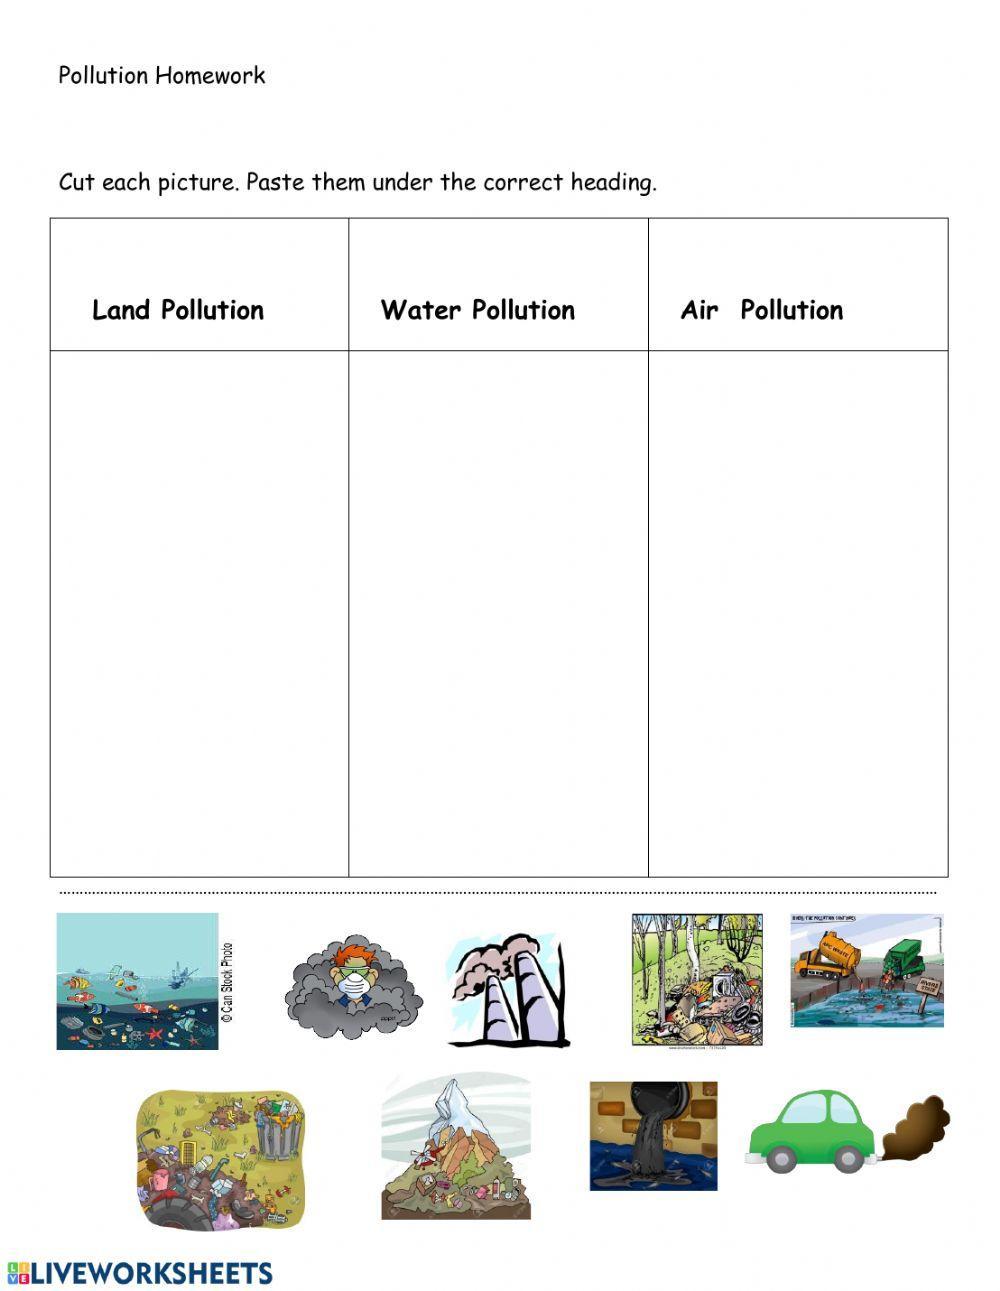 Sorting Types of Pollution